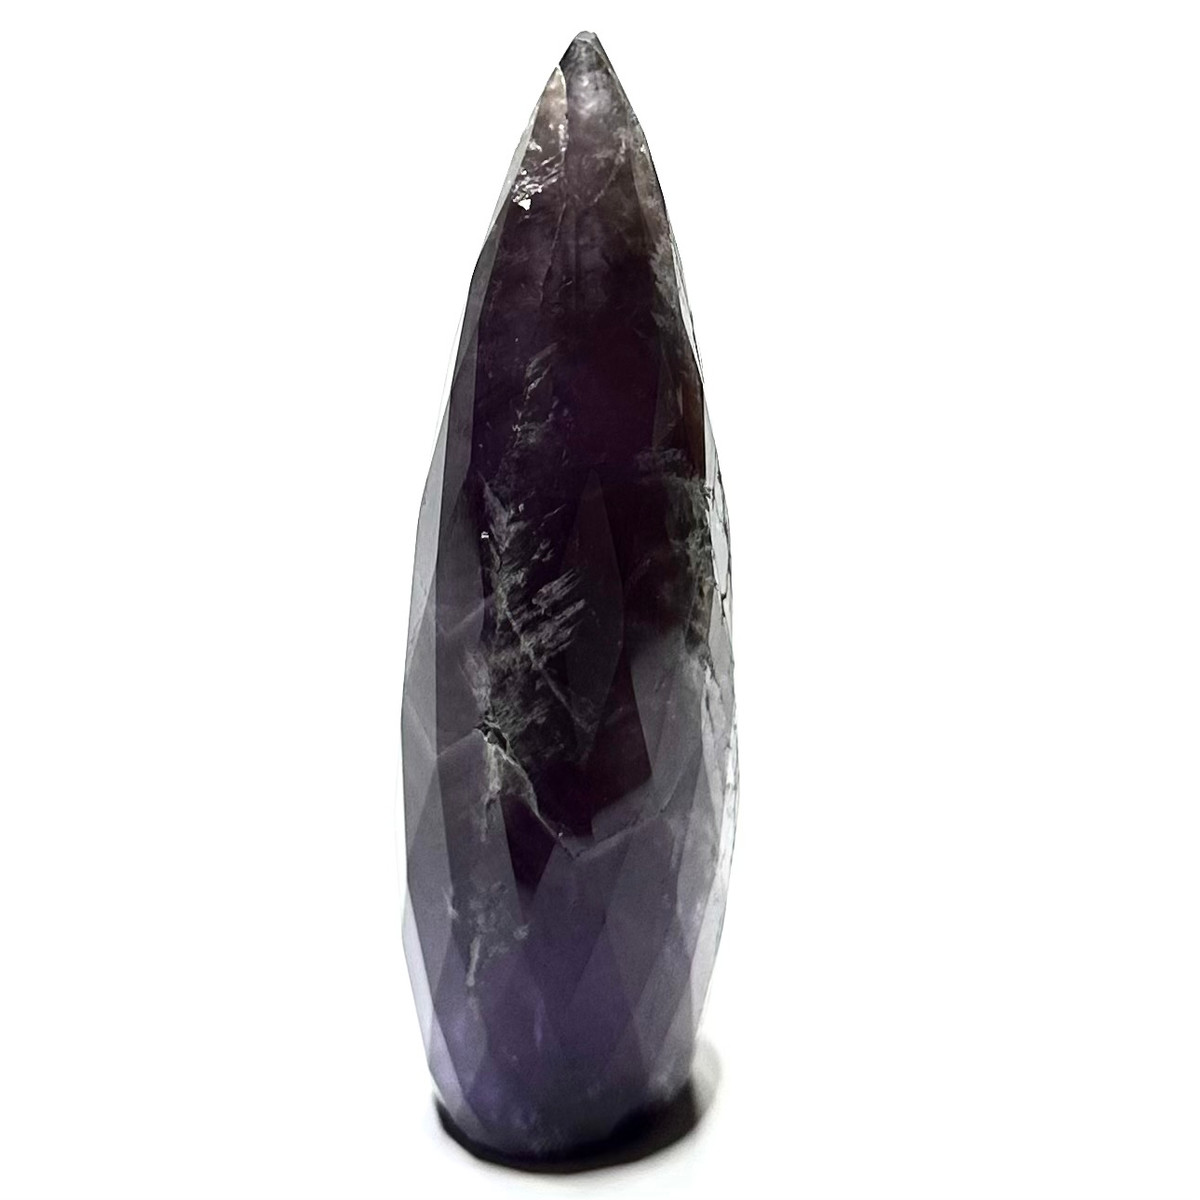 RARE-Amethyst Faceted Teardrop Stone Tower-Top Quality-4 1/2 x 1"